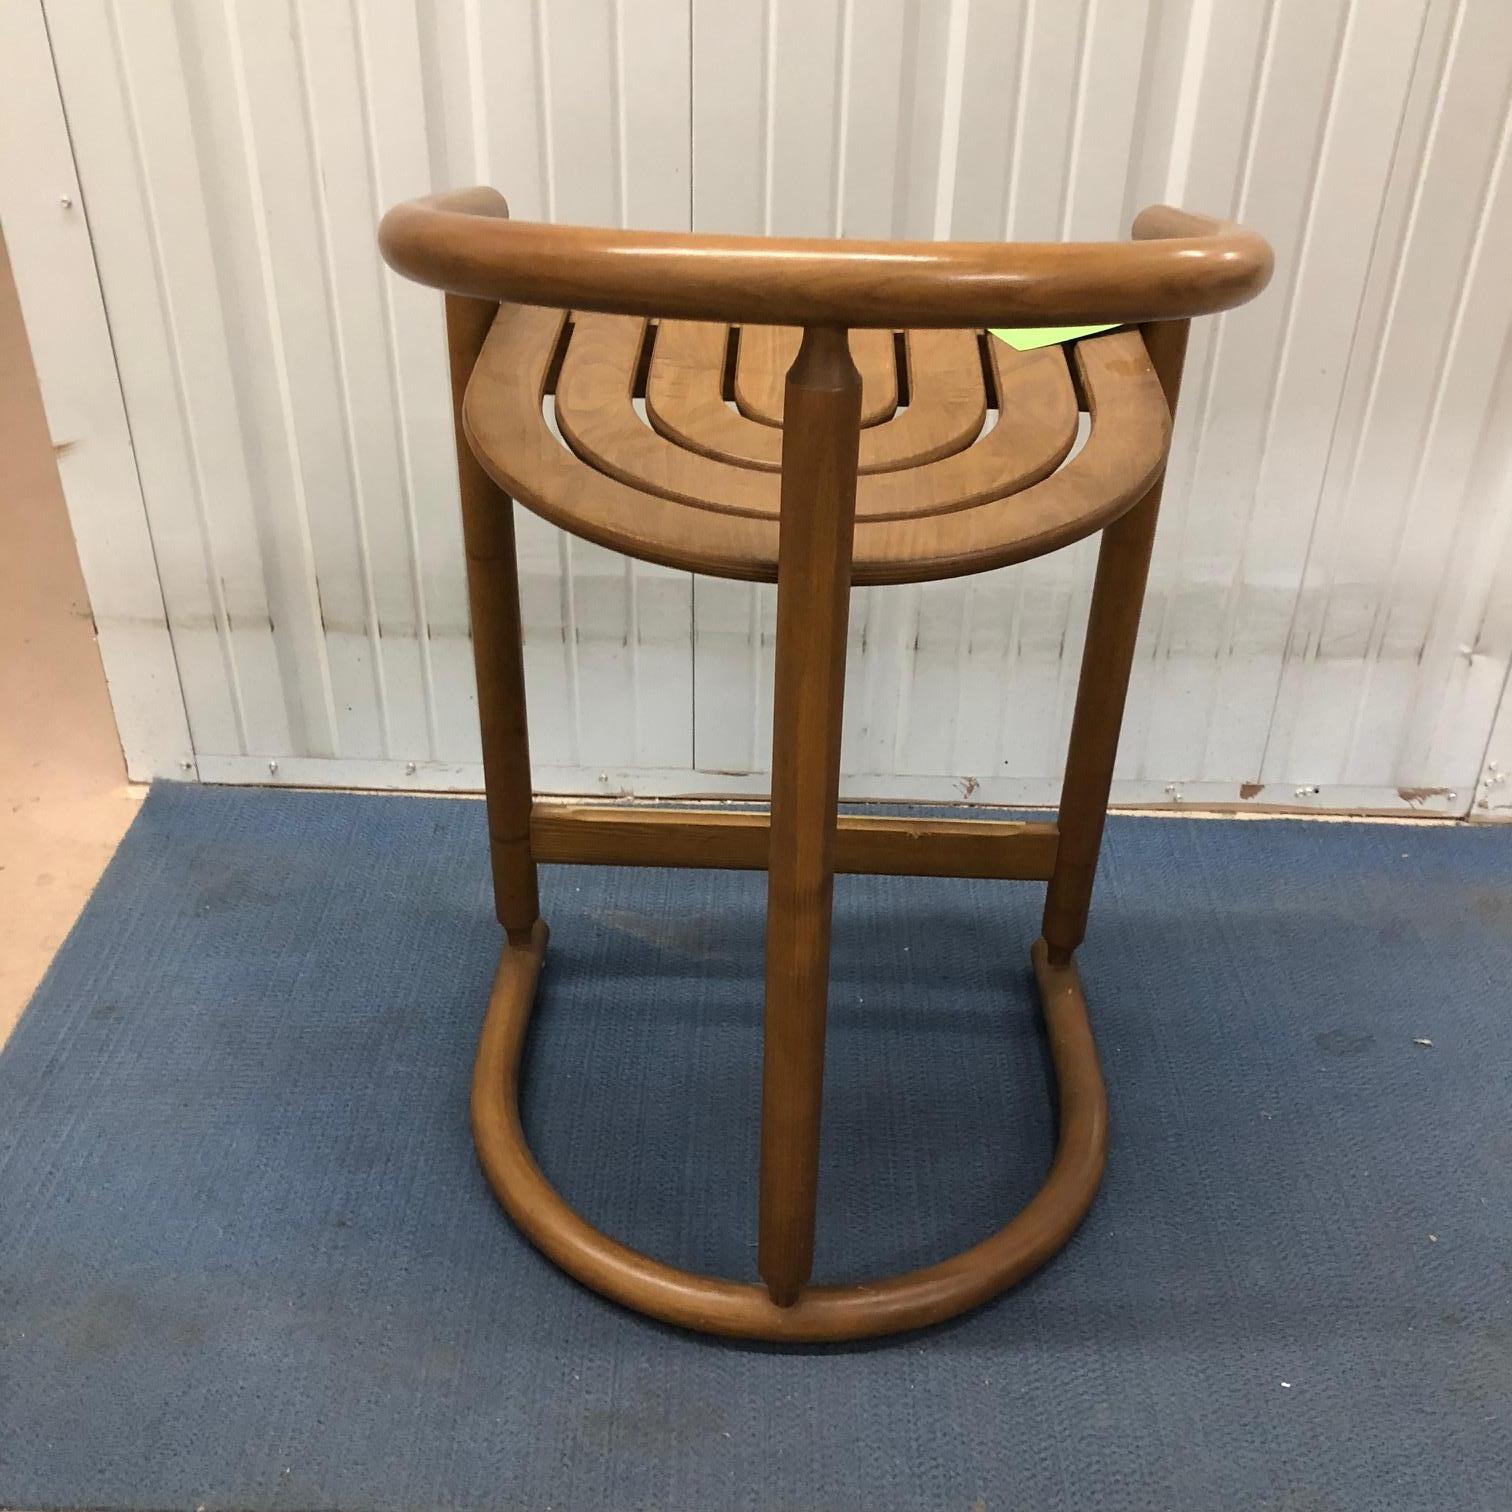 A set of three handsome midcentury bar stools in medium colored wood. Measures: 32